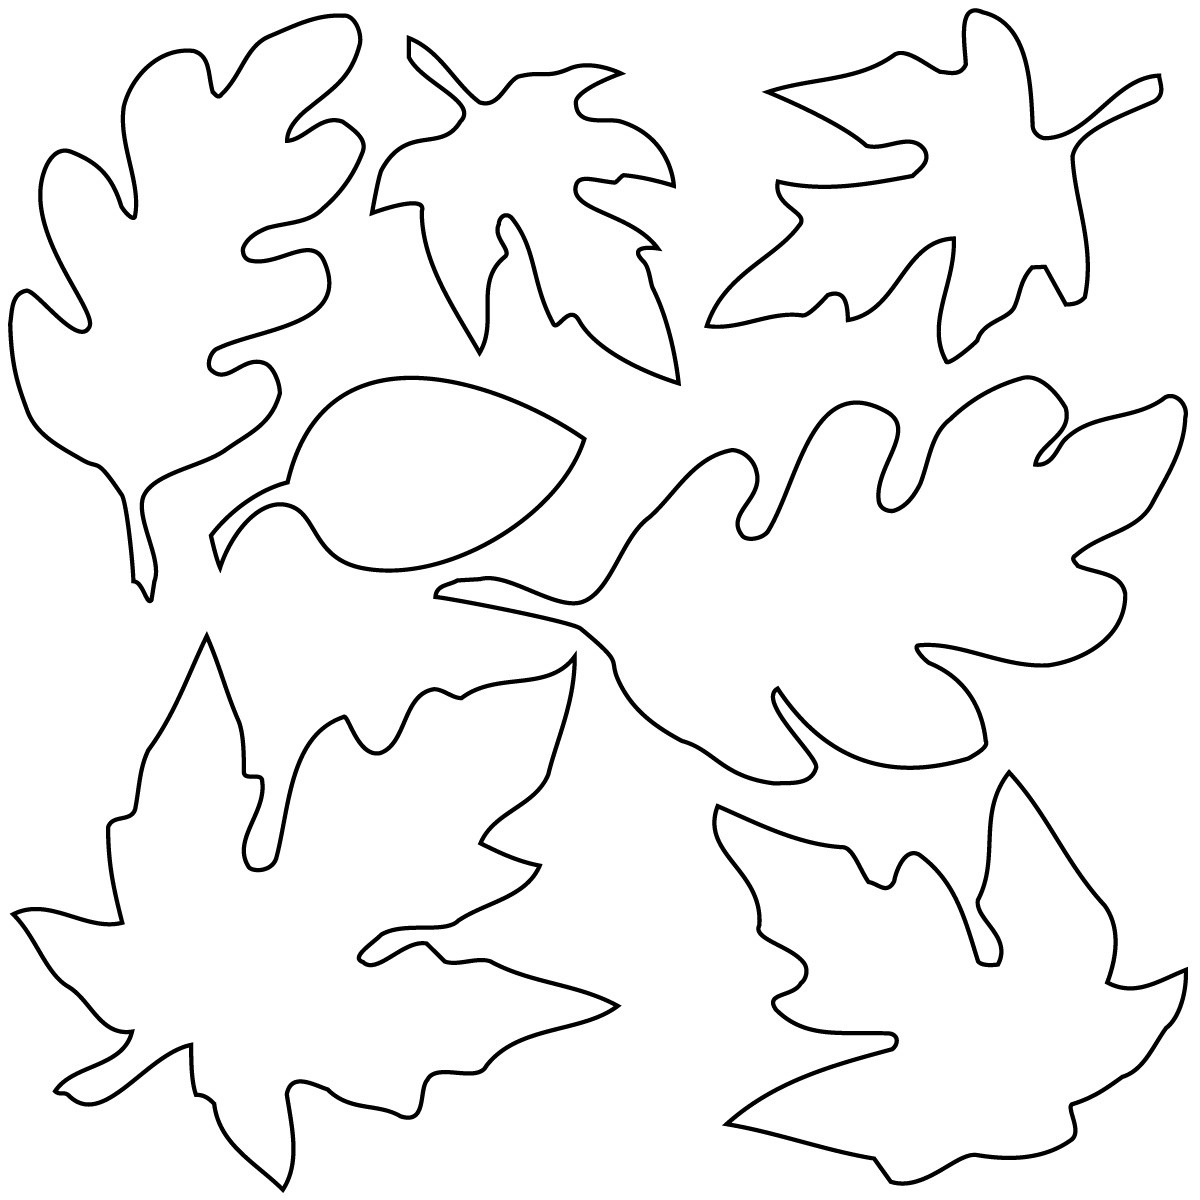 Leaves leaf black and white fall clipart clipart kid